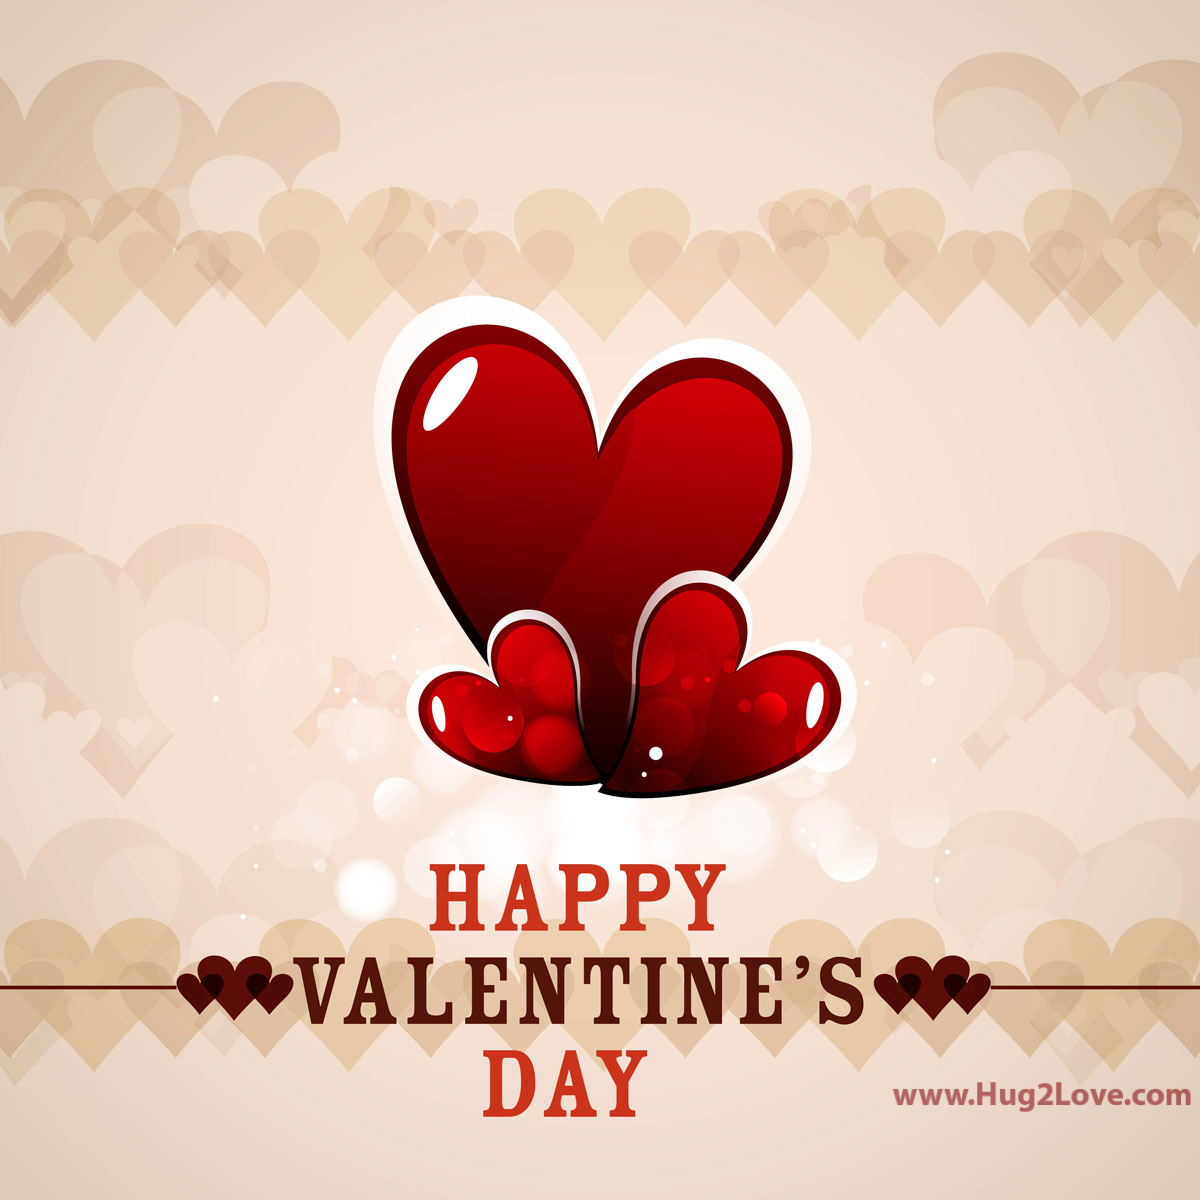 Free download Free download 100 Happy Valentines Day Images ...